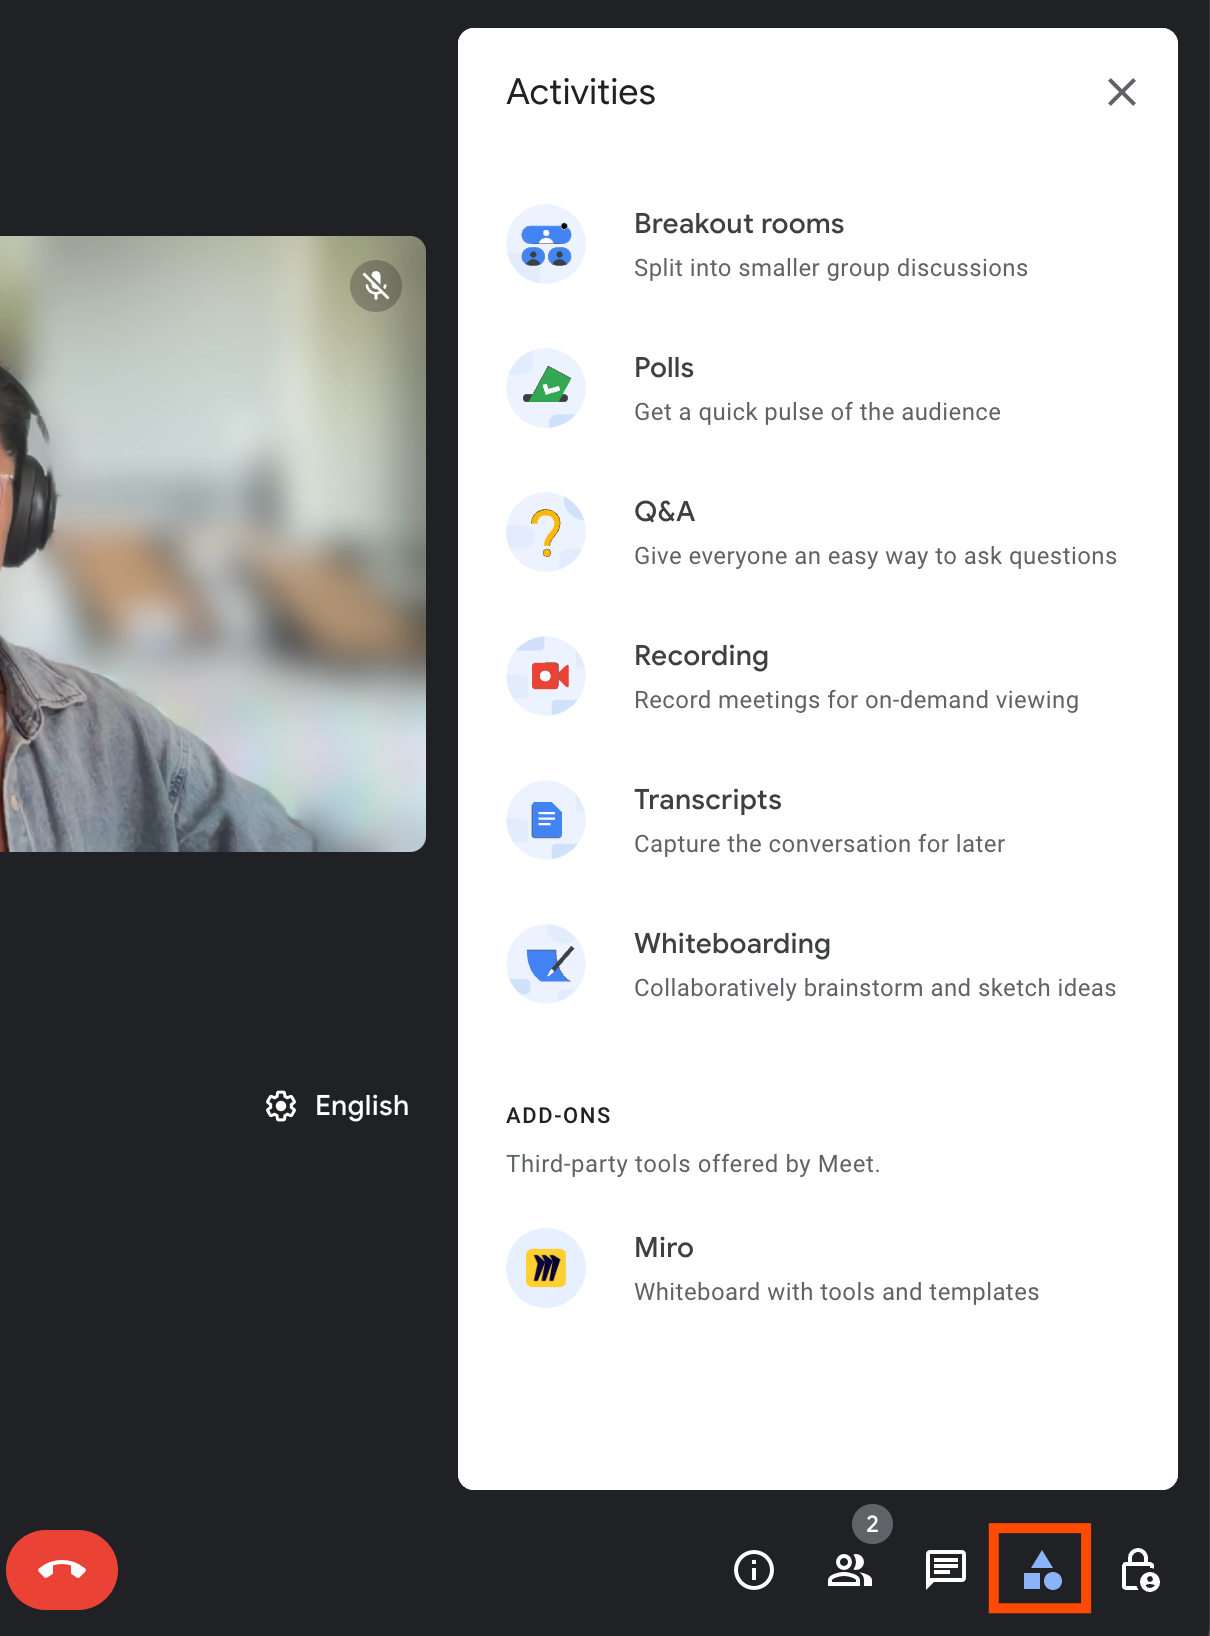 List of Google Meet features in the activities menu of a live meeting.